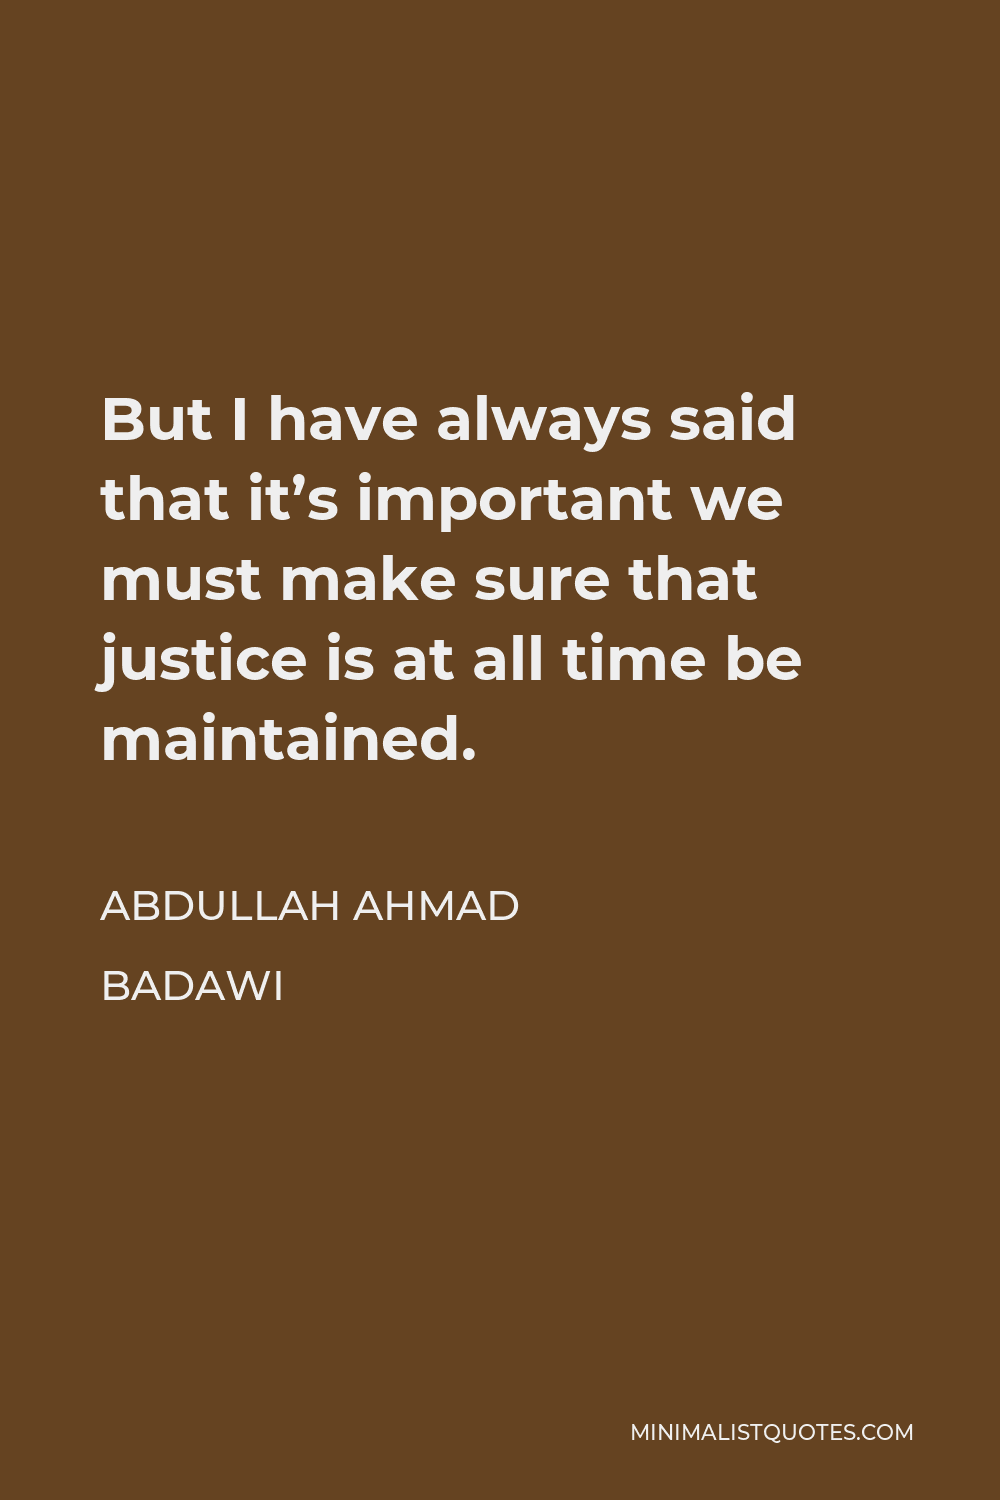 Abdullah Ahmad Badawi Quote - But I have always said that it’s important we must make sure that justice is at all time be maintained.